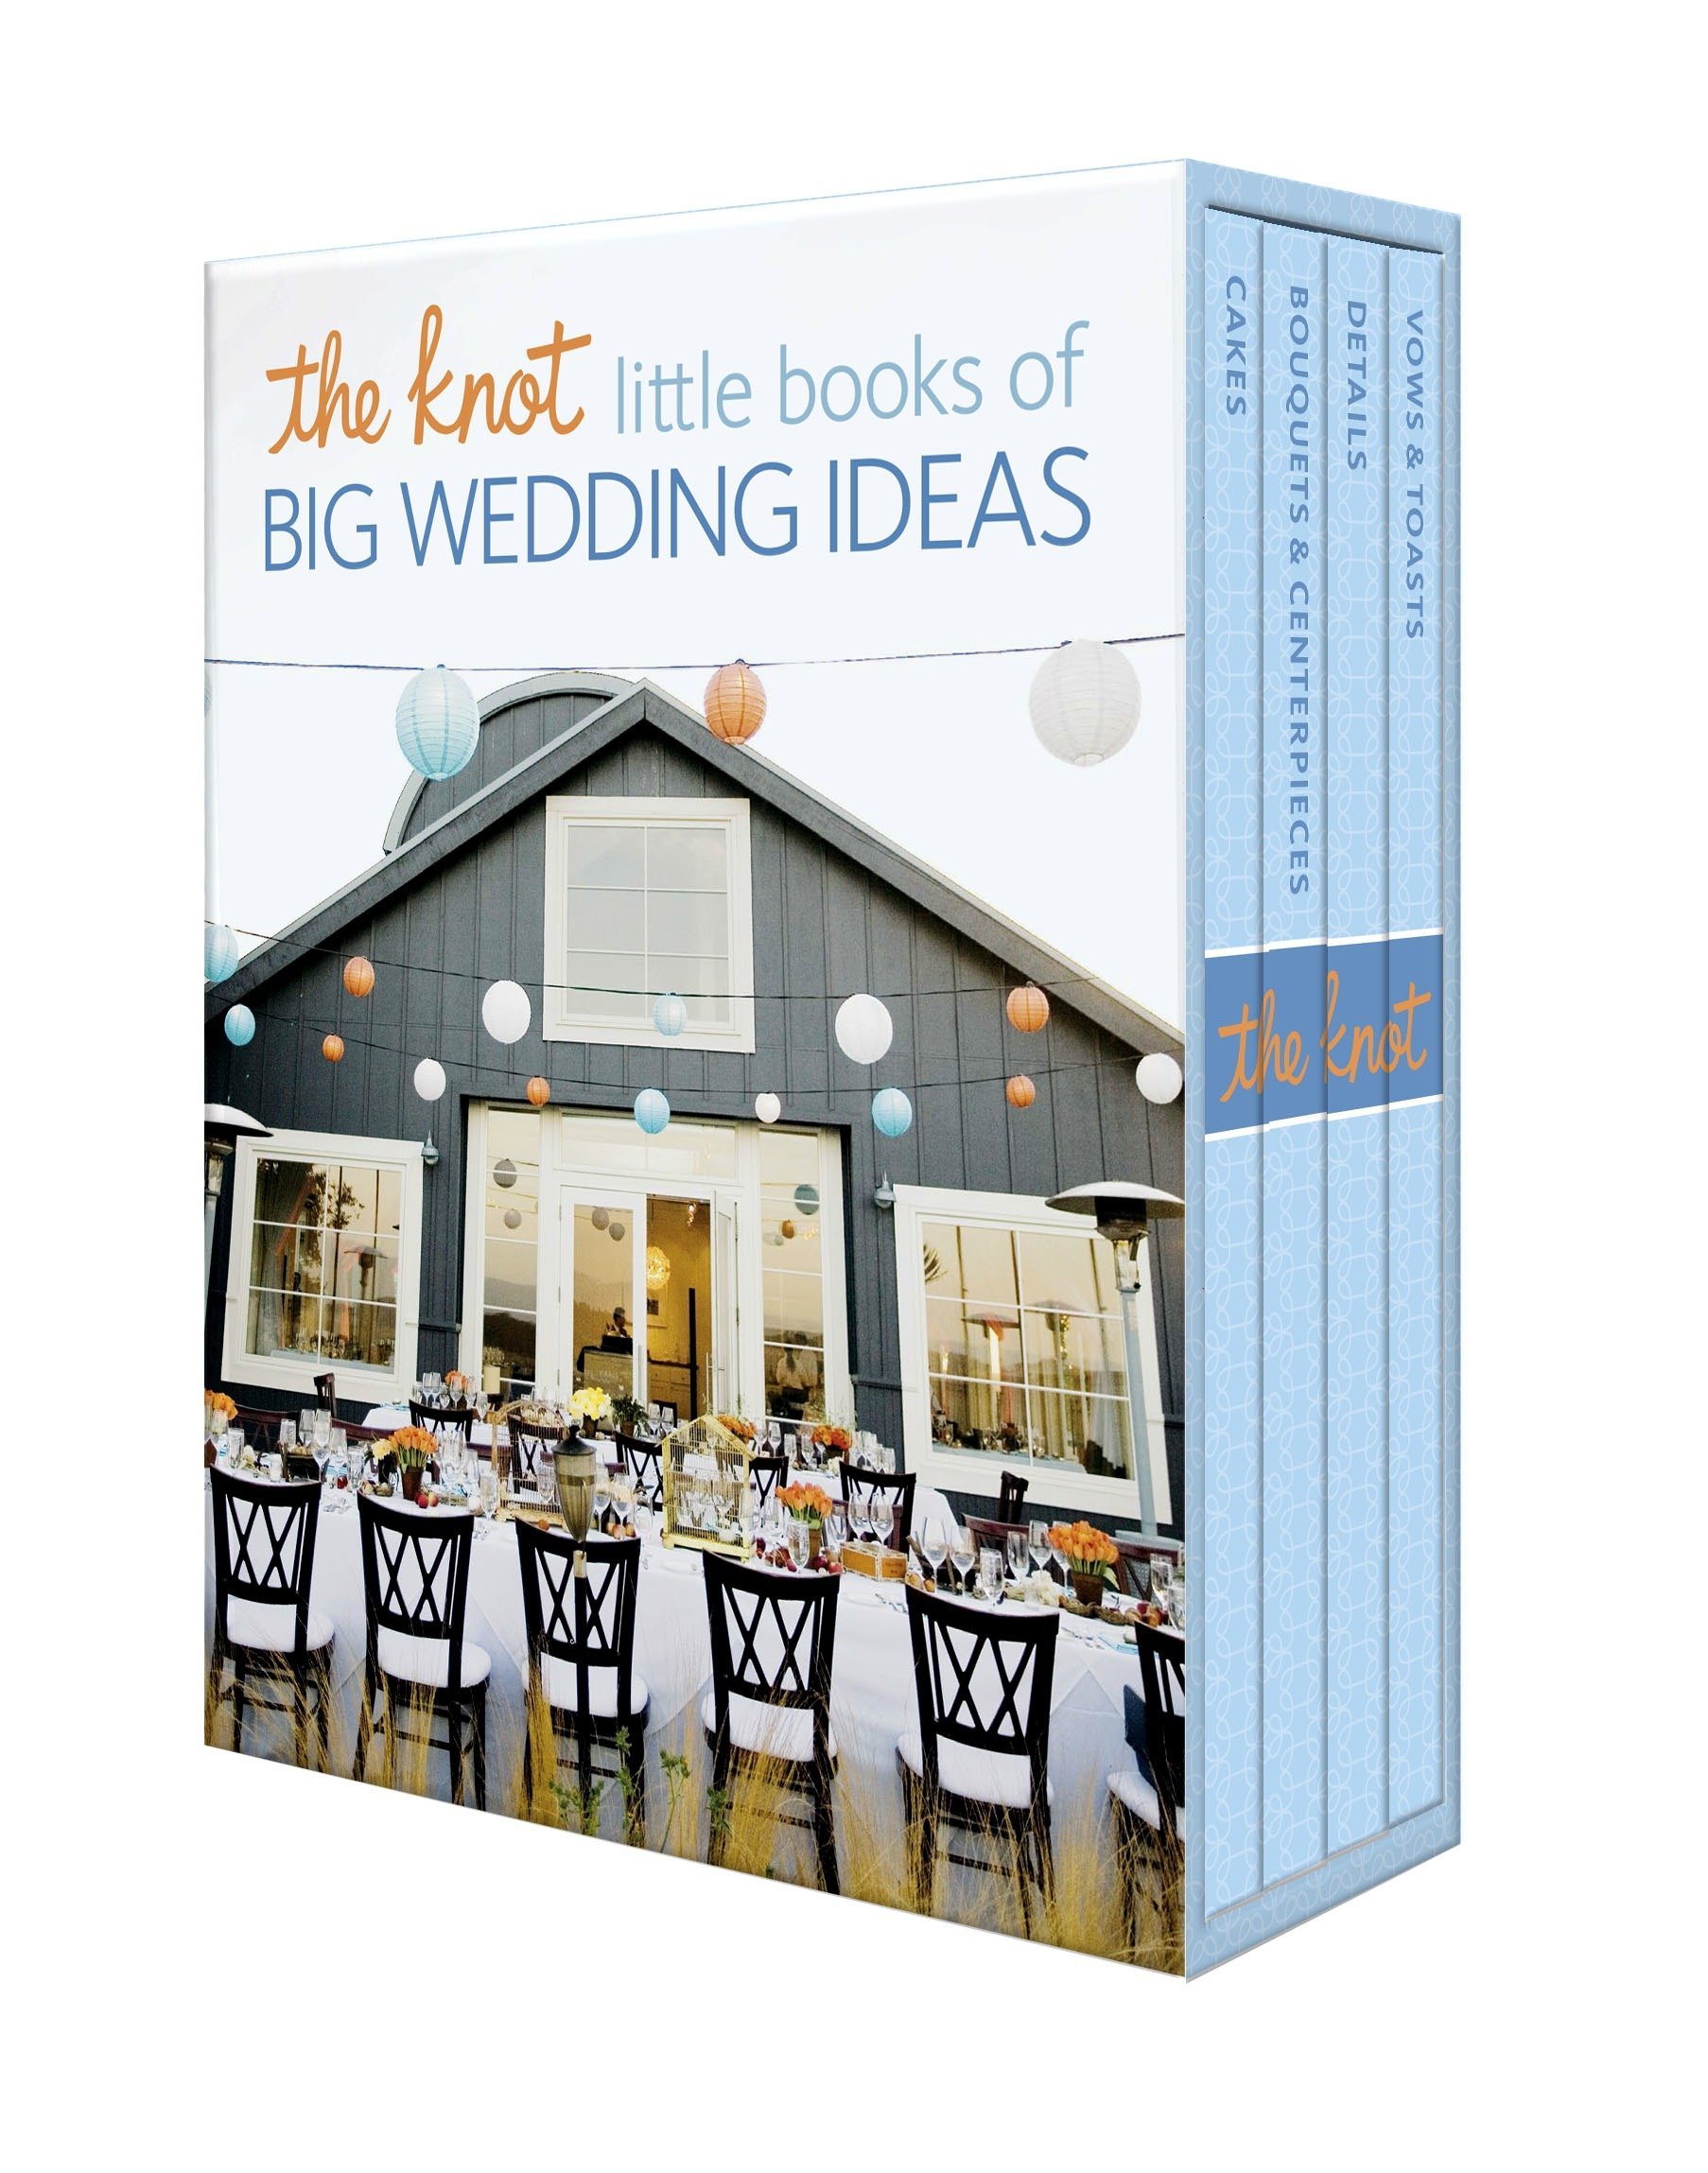 The Knot Little Books of Big Wedding Ideas: Cakes; Bouquets & Centerpieces; Vows & Toasts; and Details by Editors of The Knot on Amazon